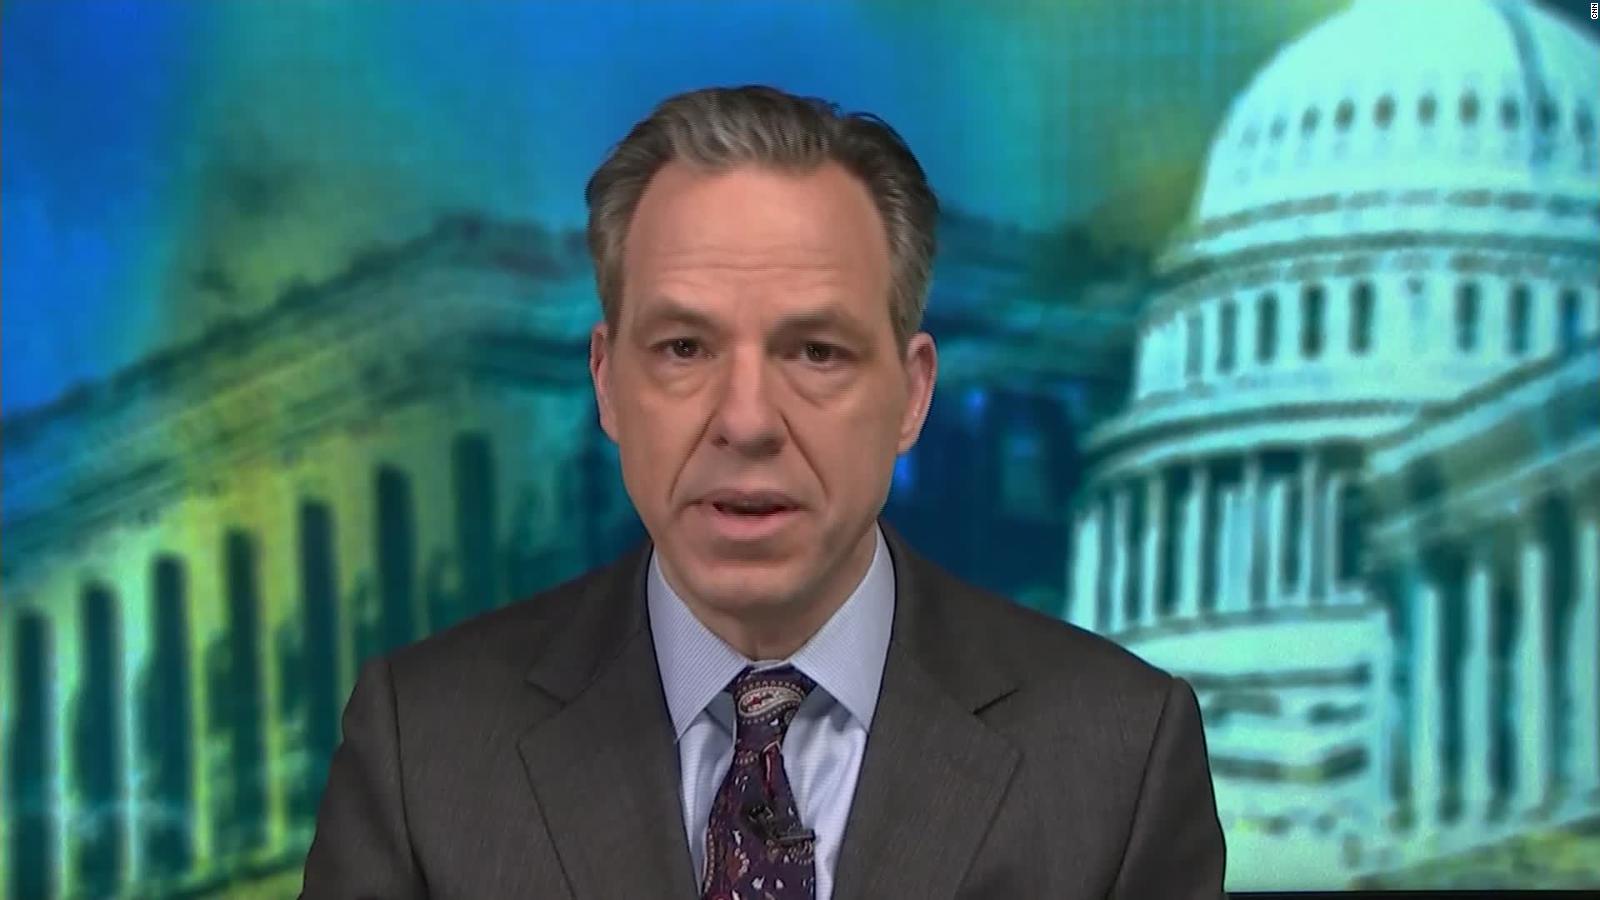 Jake Tapper Donald Trump S Musings Were There For All To See And